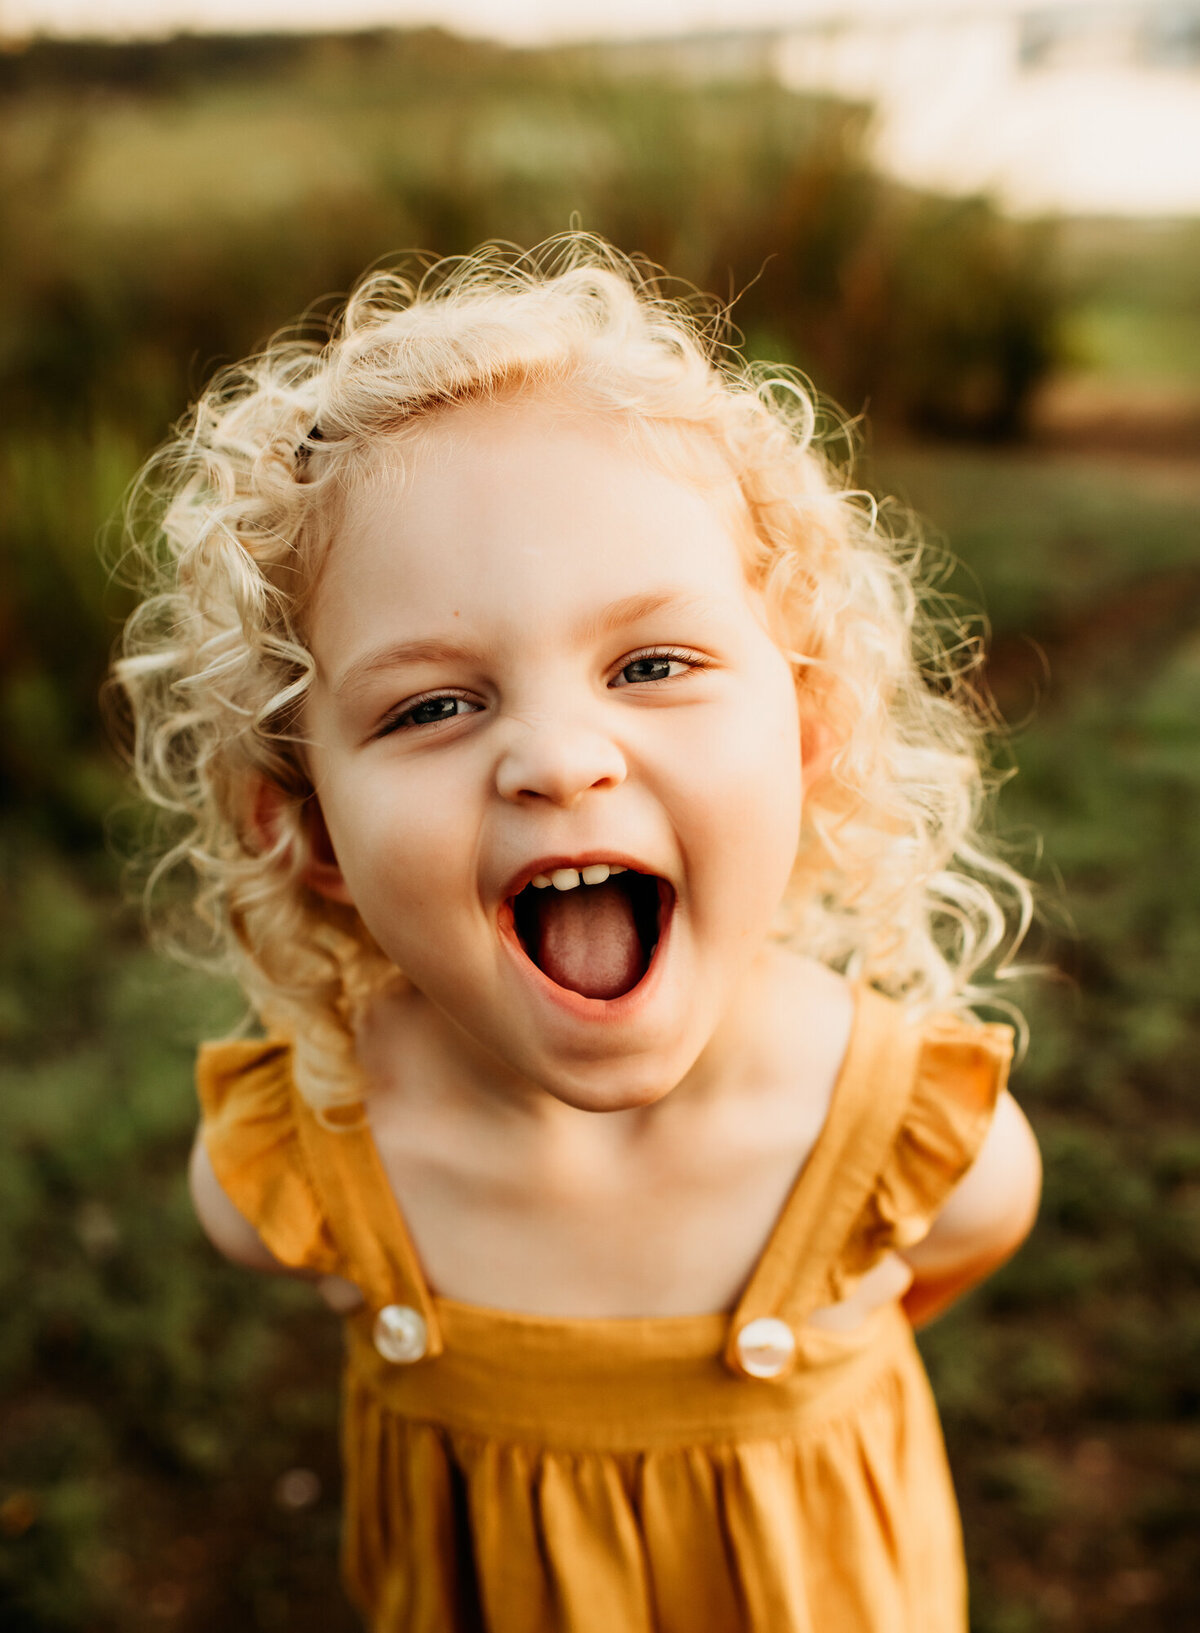 Little girl laughing at the camera in a yellow dress.